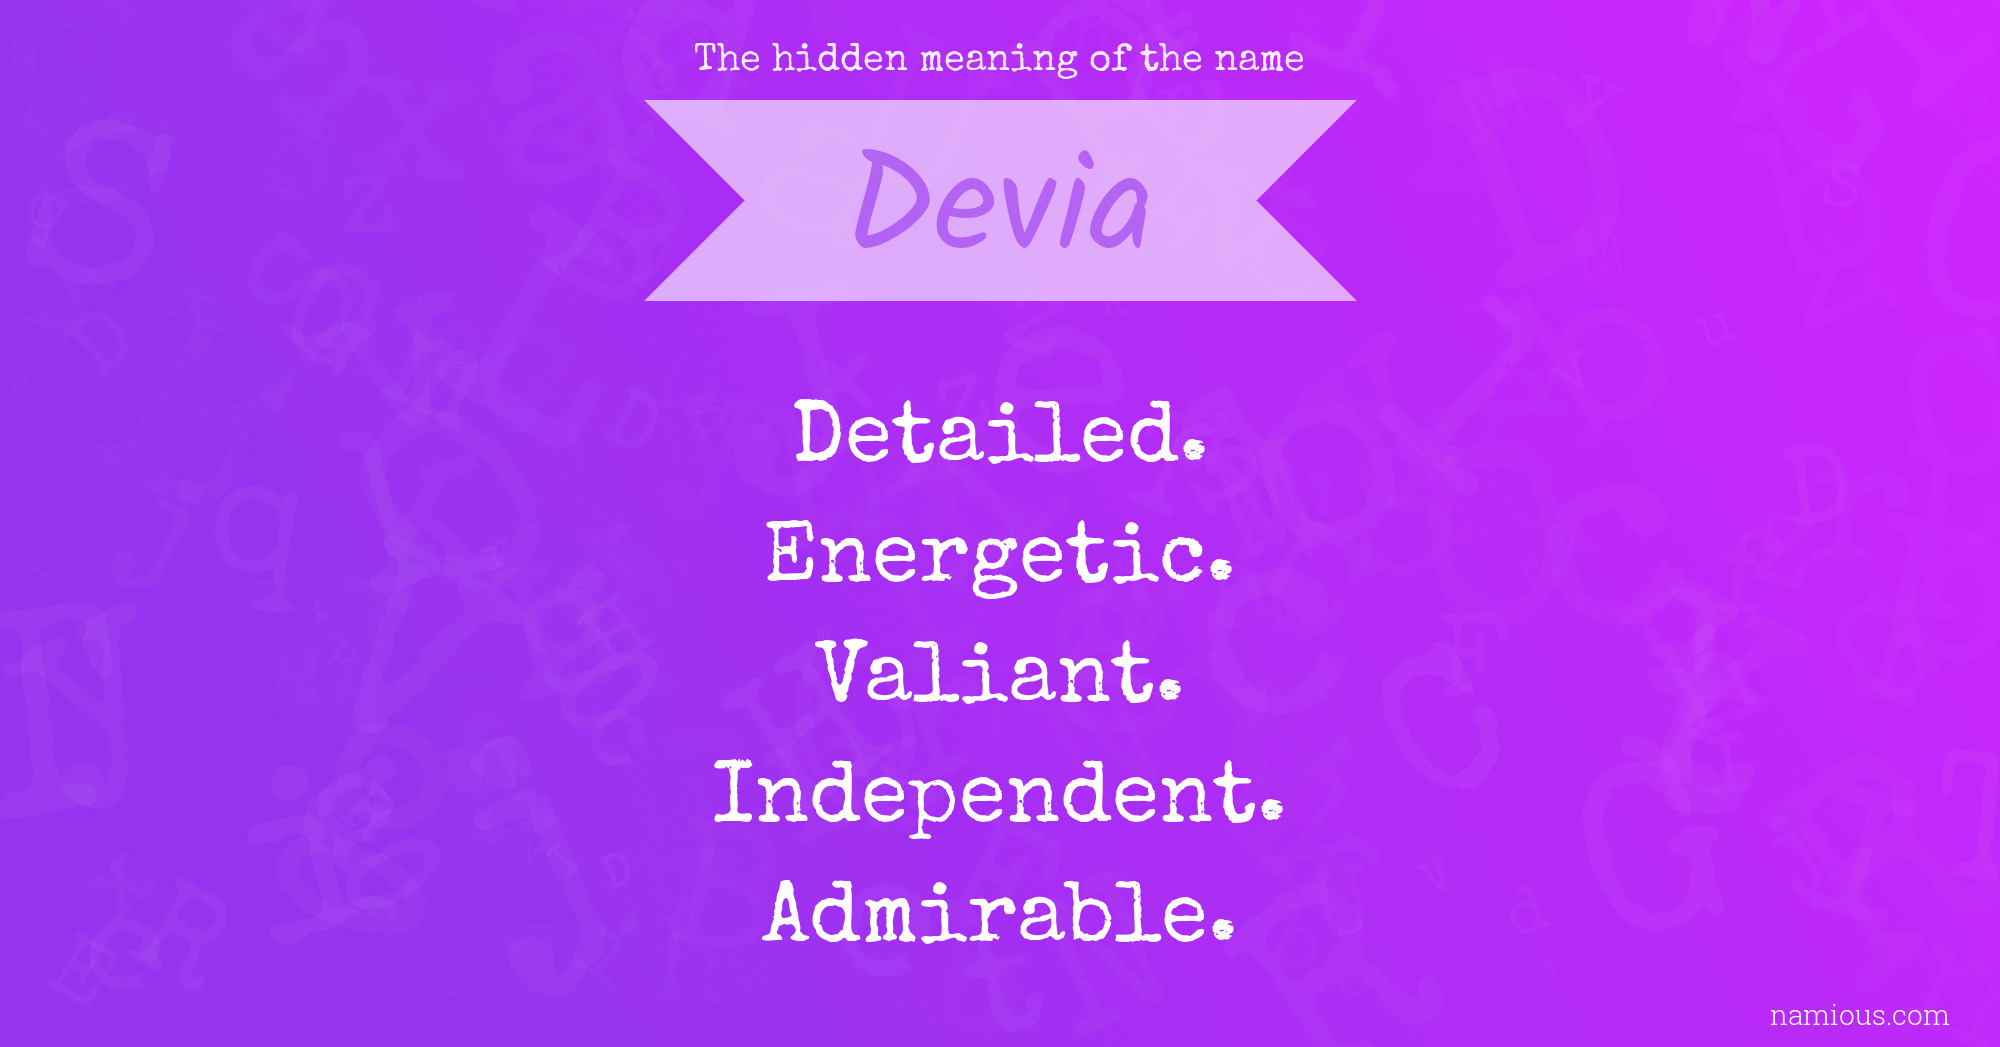 The hidden meaning of the name Devia